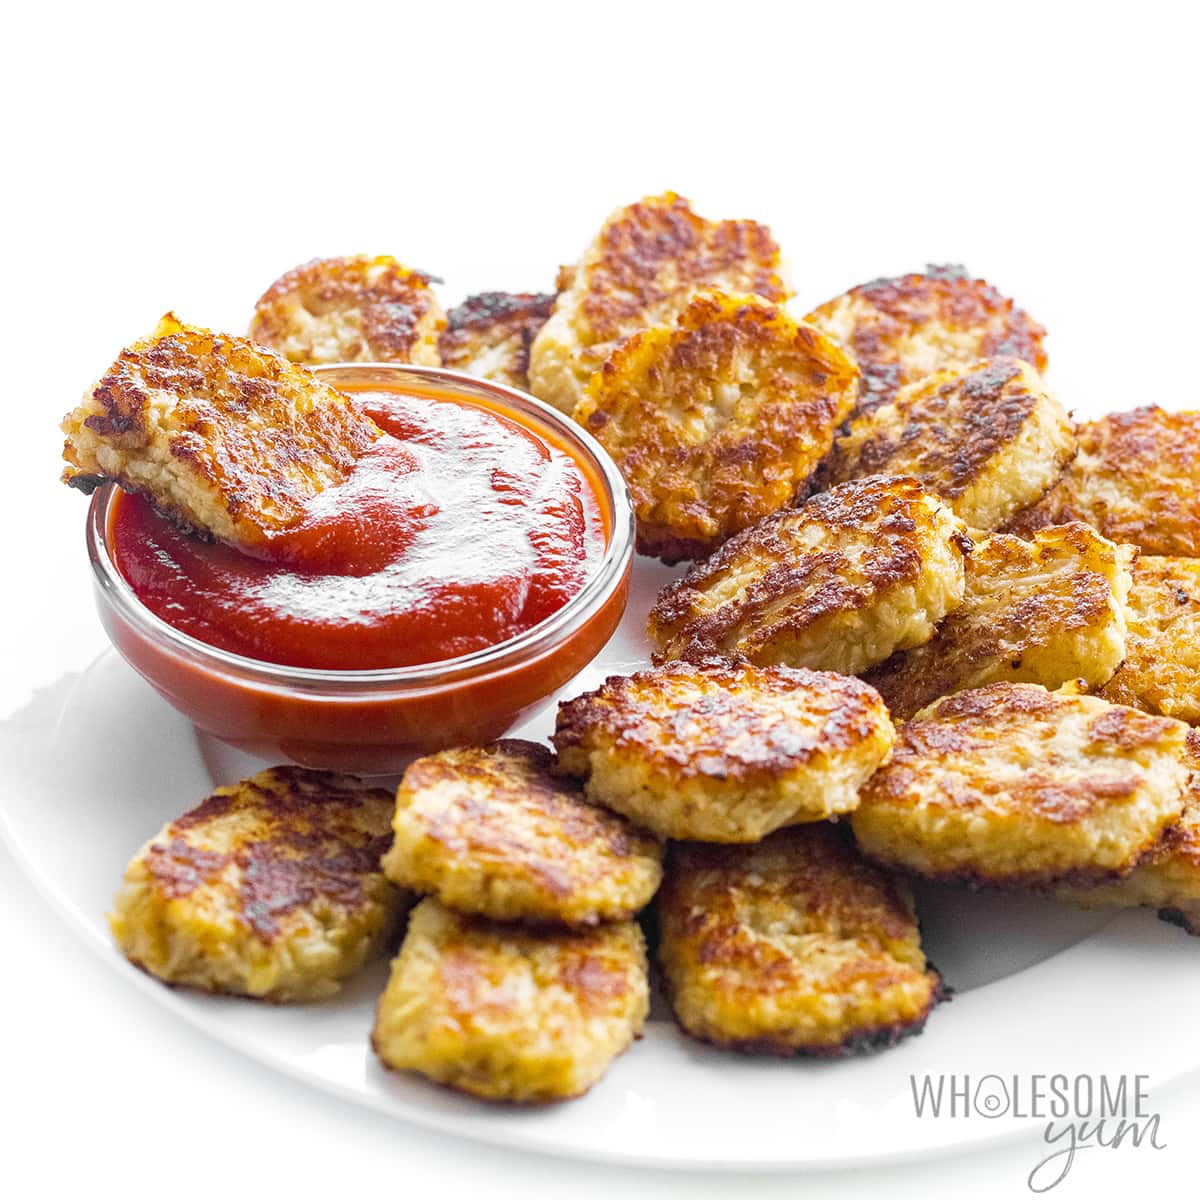 Tater tot in bowl of ketchup with others spread around.